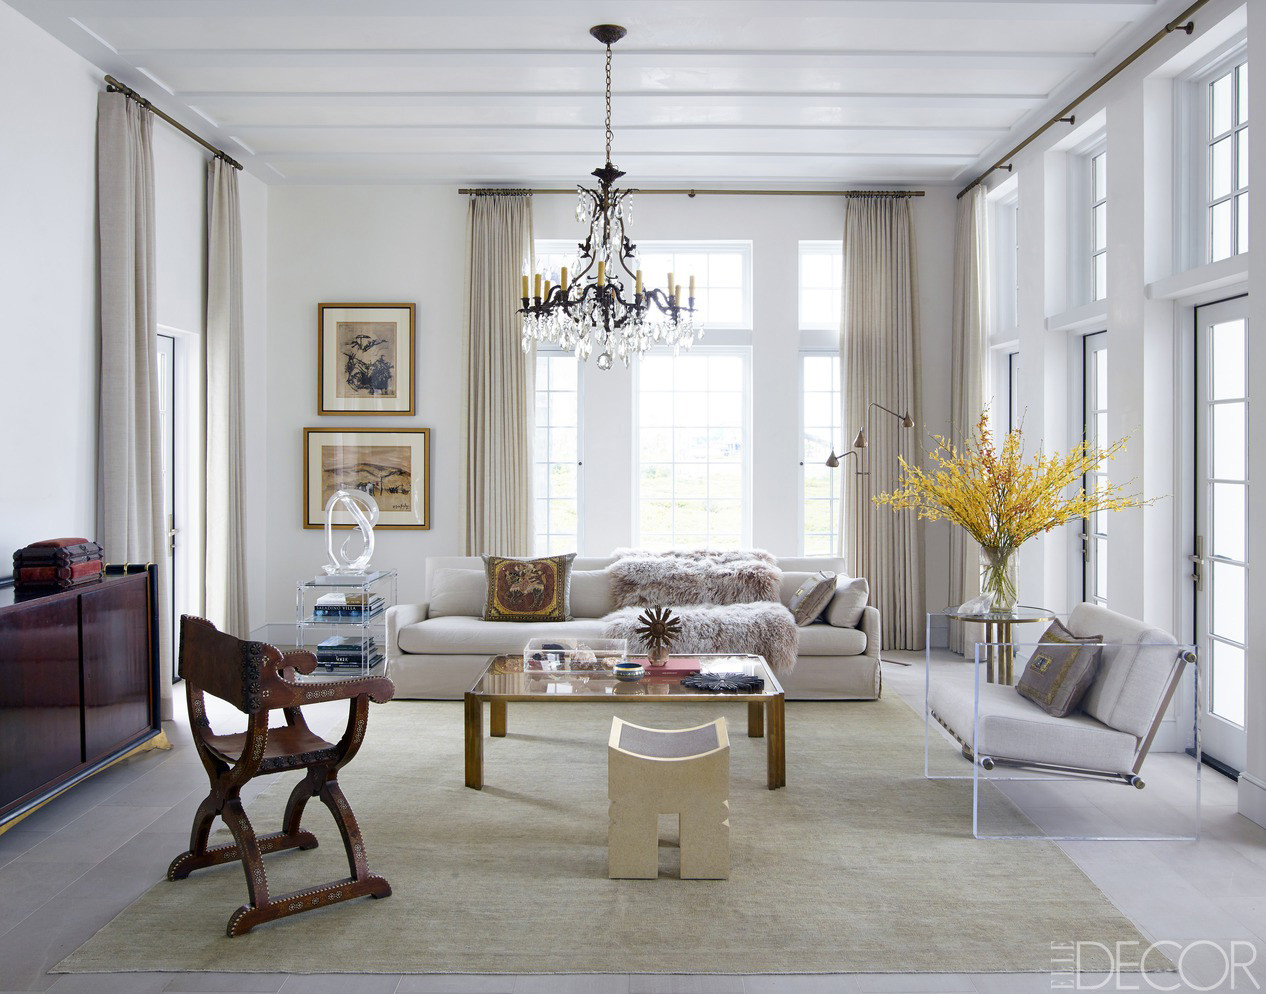 Living Room Decorating
 Chic Living Room Decorating Ideas and Design ELLE DECOR